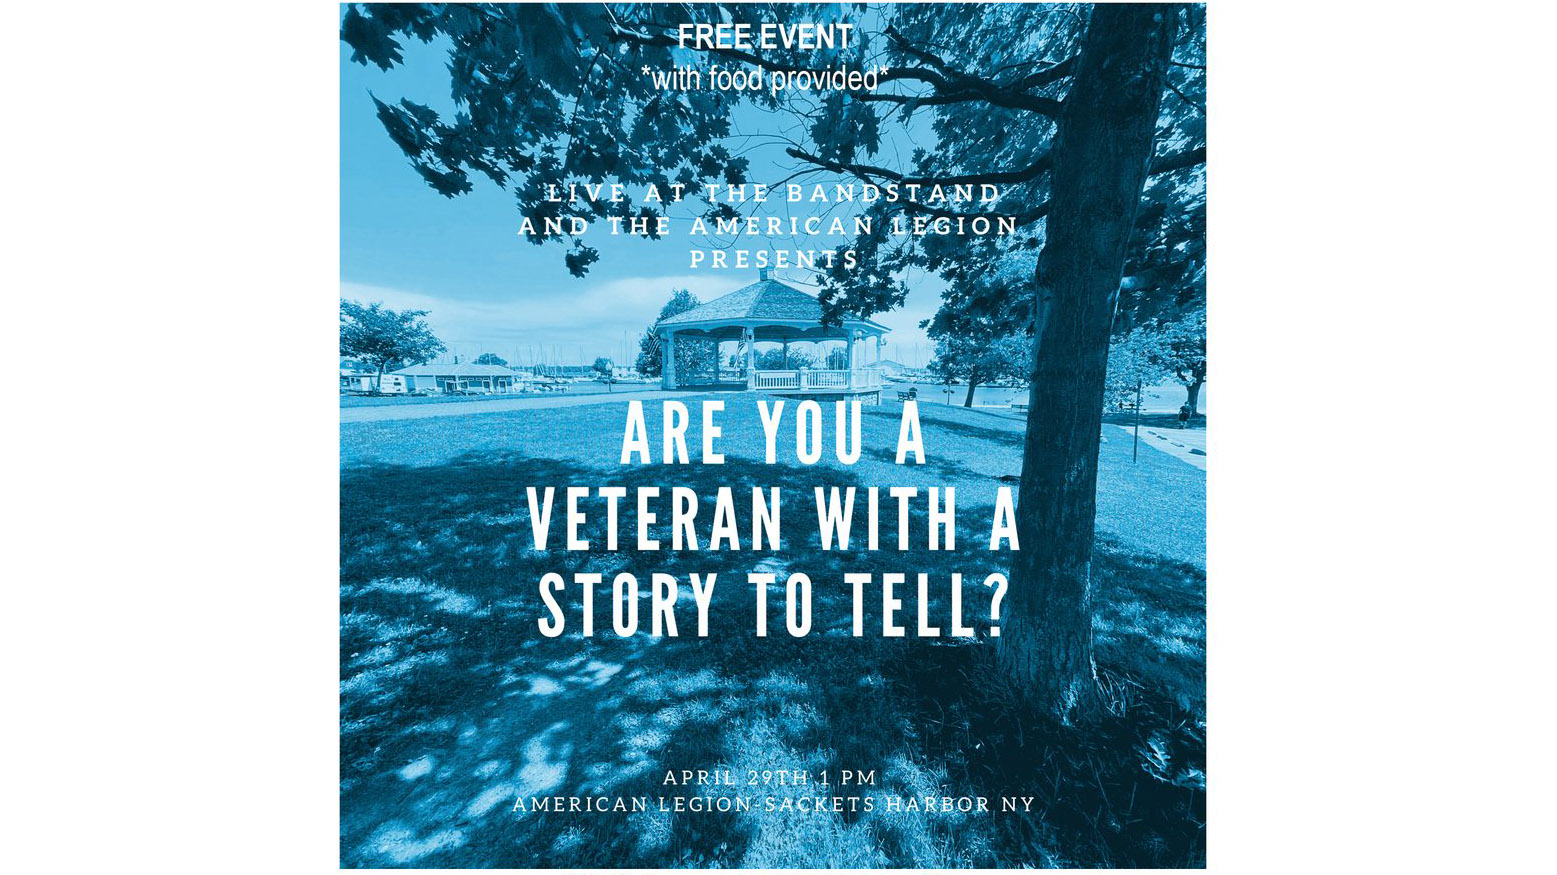 Cropped portion of the Veterans Storytelling event flyer by Live at the Bandstand